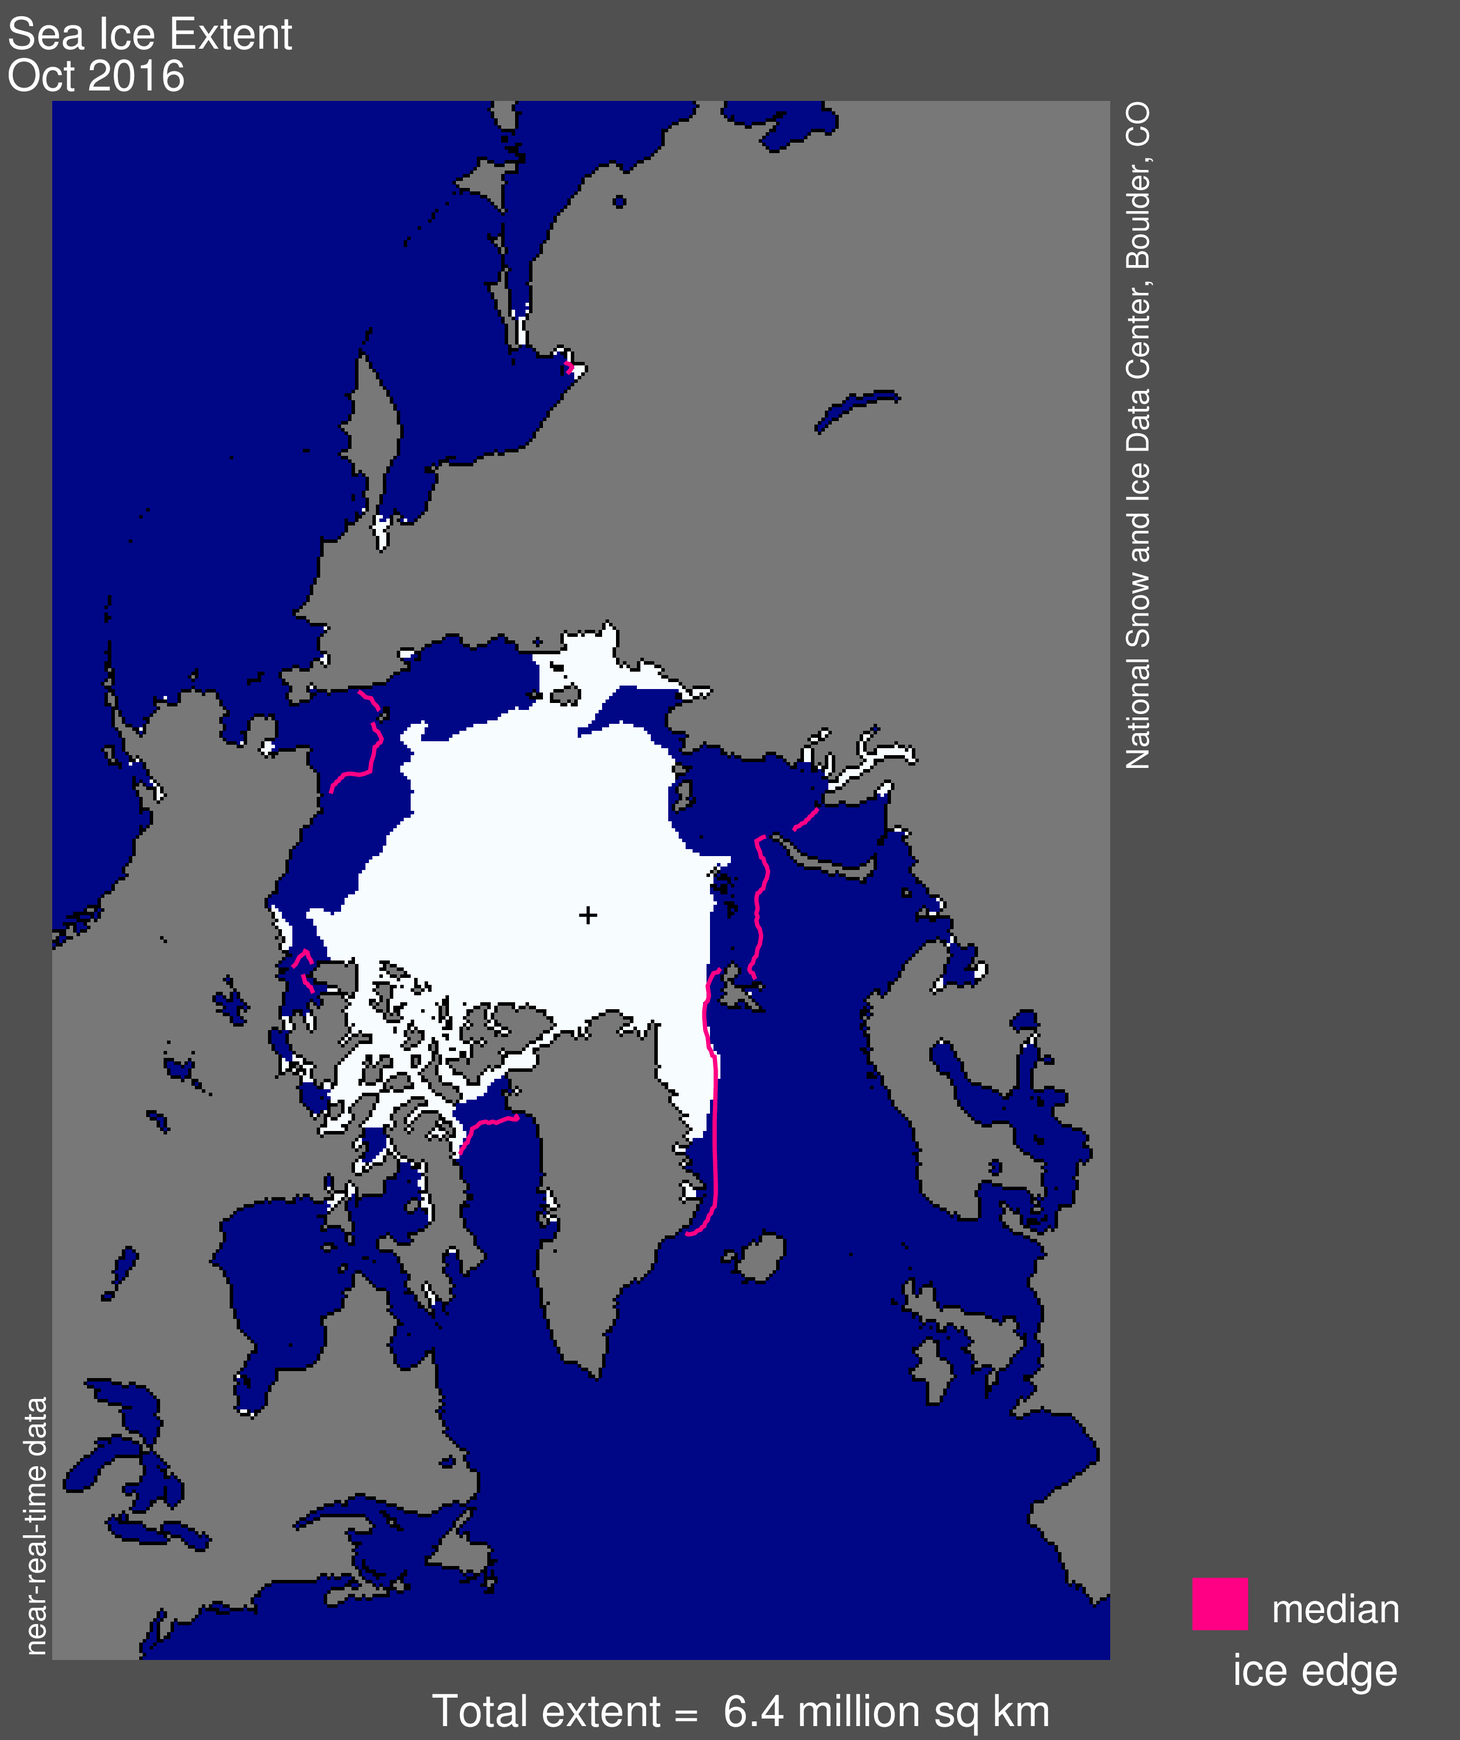 rctic sea ice extent for October 2016 was 6.40 million square kilometers (2.5 million square miles). The magenta line shows the 1981 to 2010 median extent for that month. The black cross indicates the geographic North Pole. Credit: National Snow and Ice Data Center